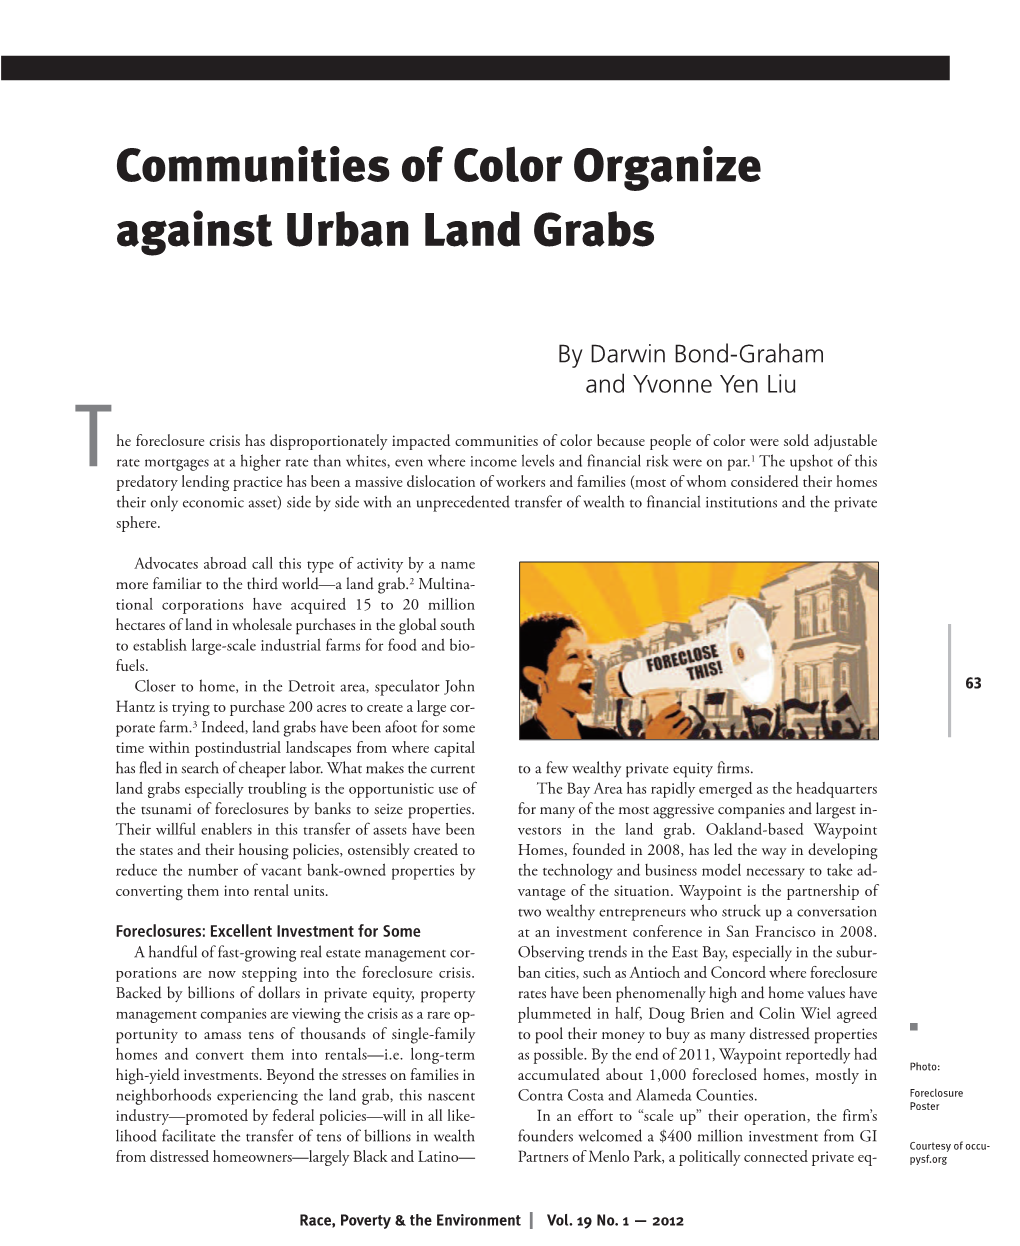 Communities of Color Organize Against Urban Land Grabs